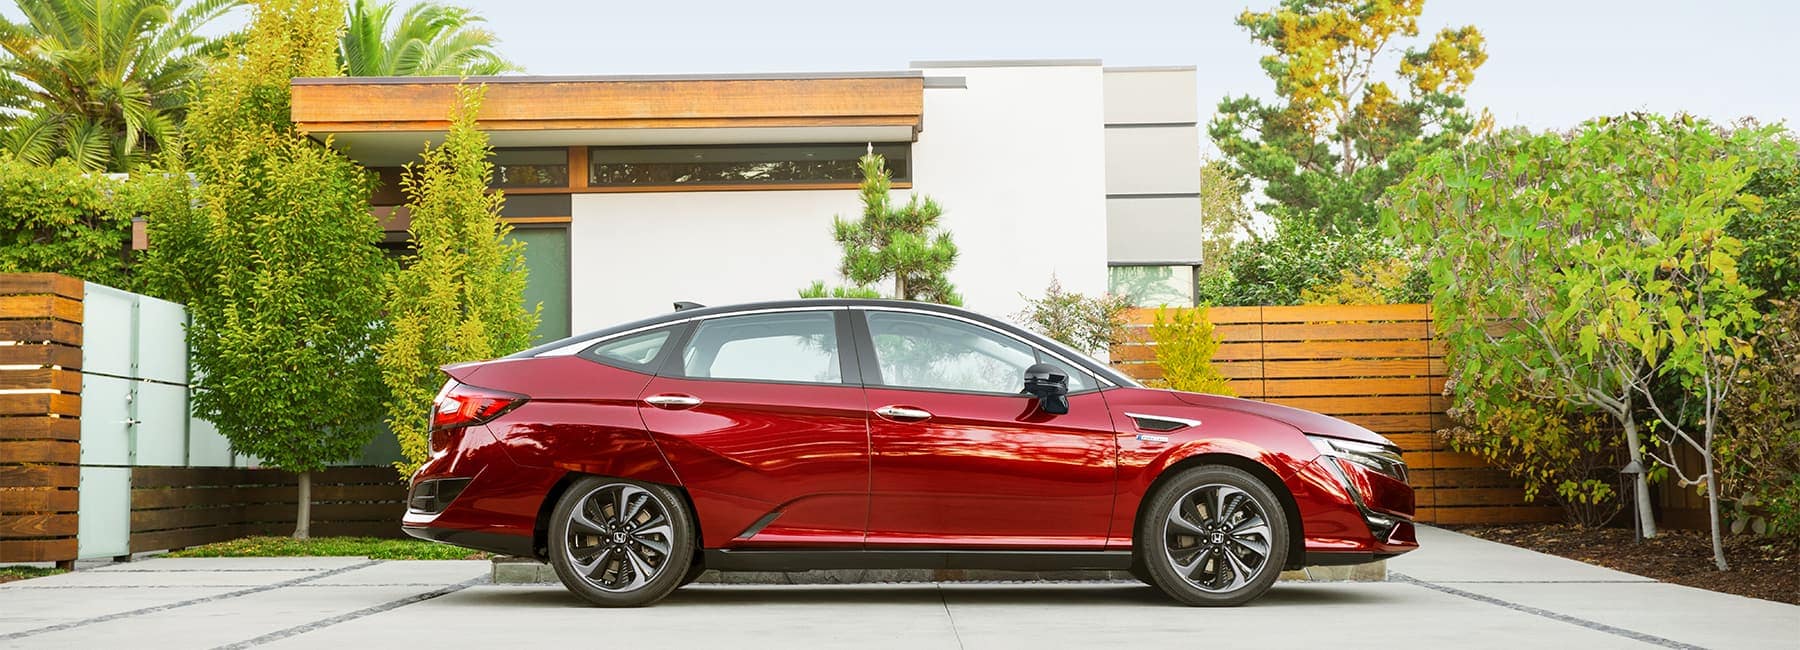 2020-Honda-Clarity-parked-side-view